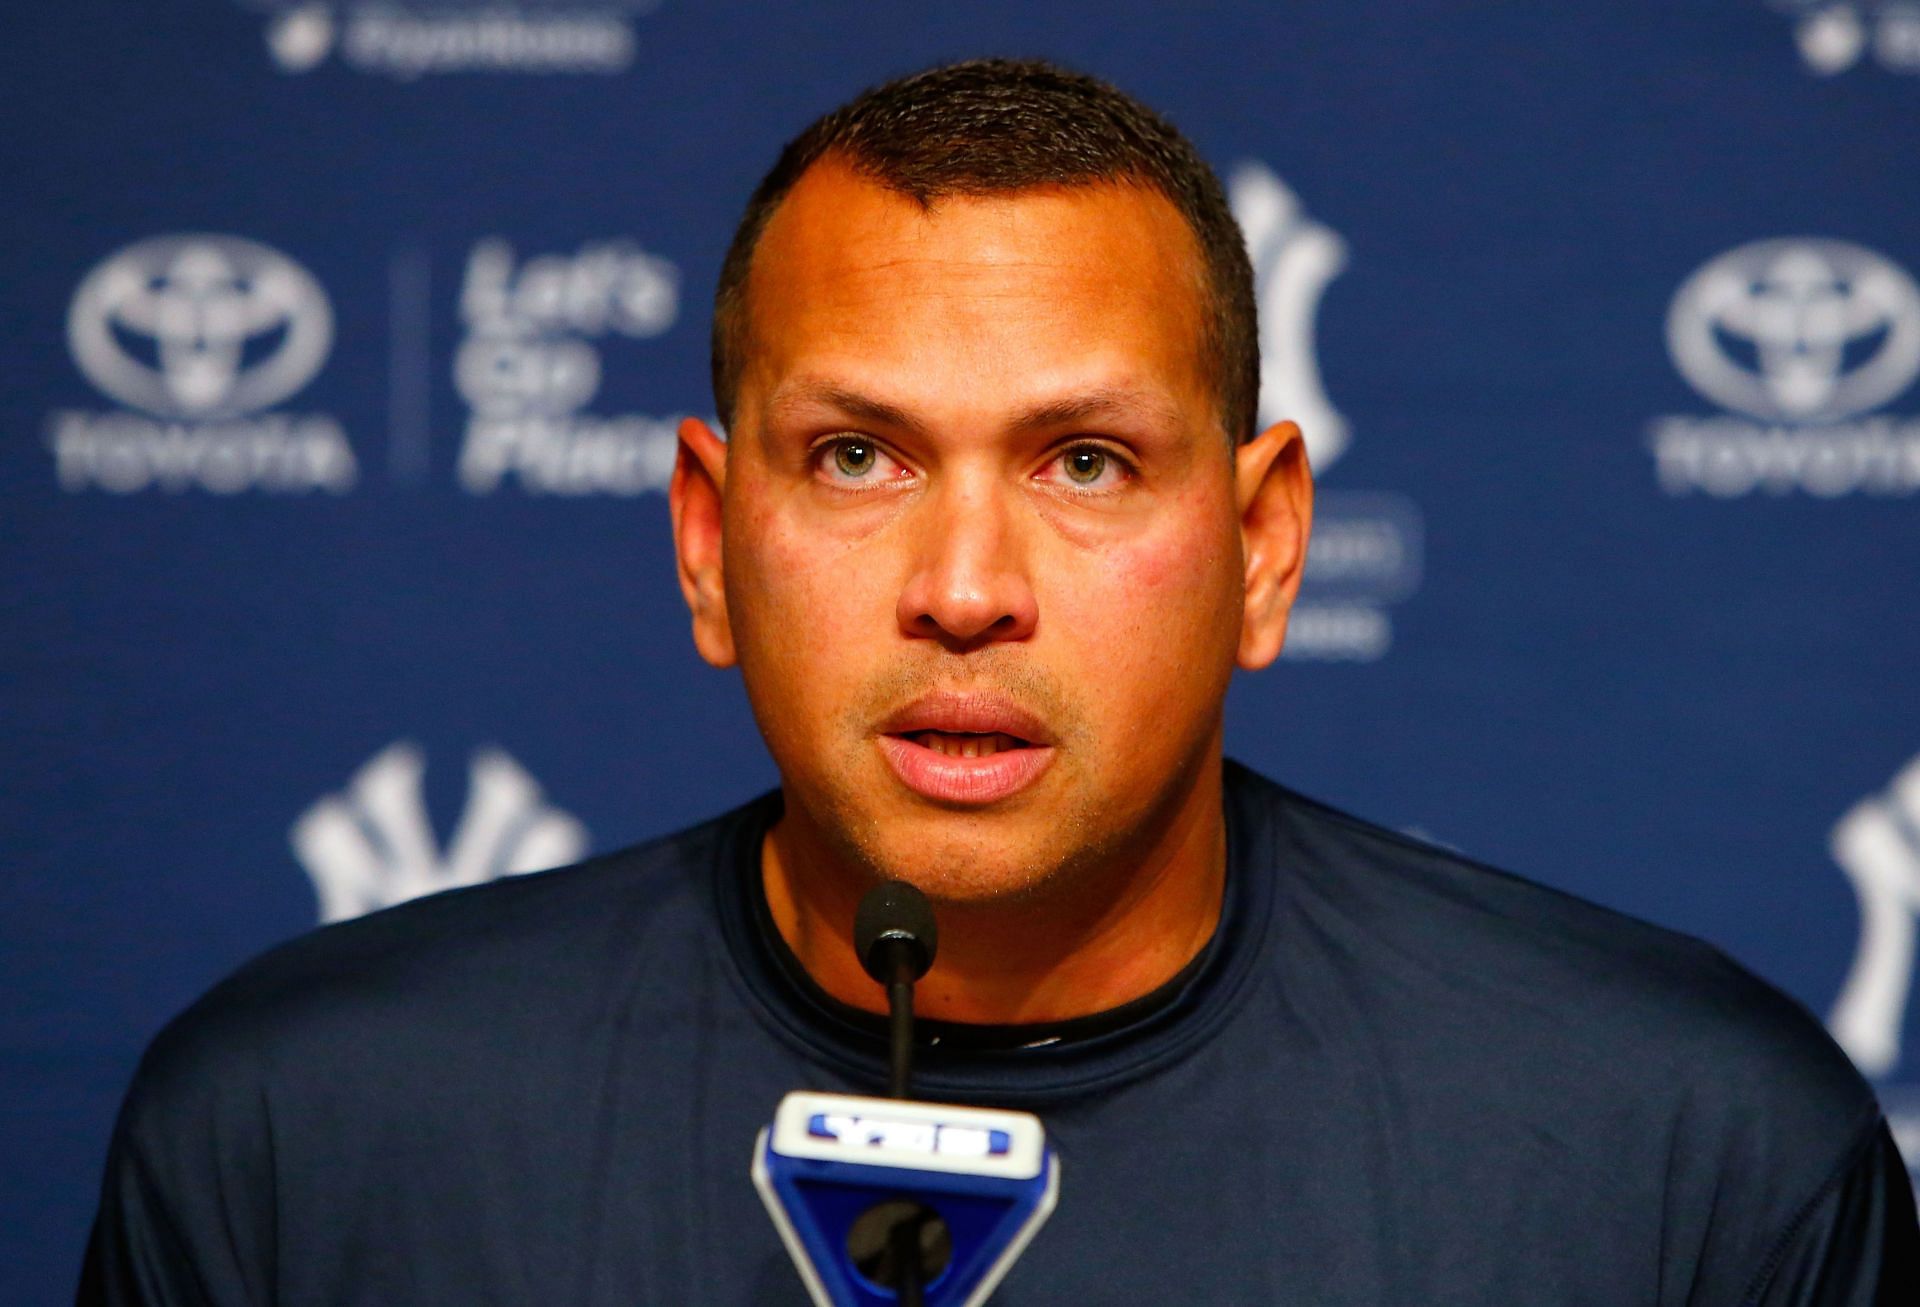 Alex Rodriguez speaks during a news conference on August 7, 2016 at Yankee Stadium in the Bronx borough of New York City.